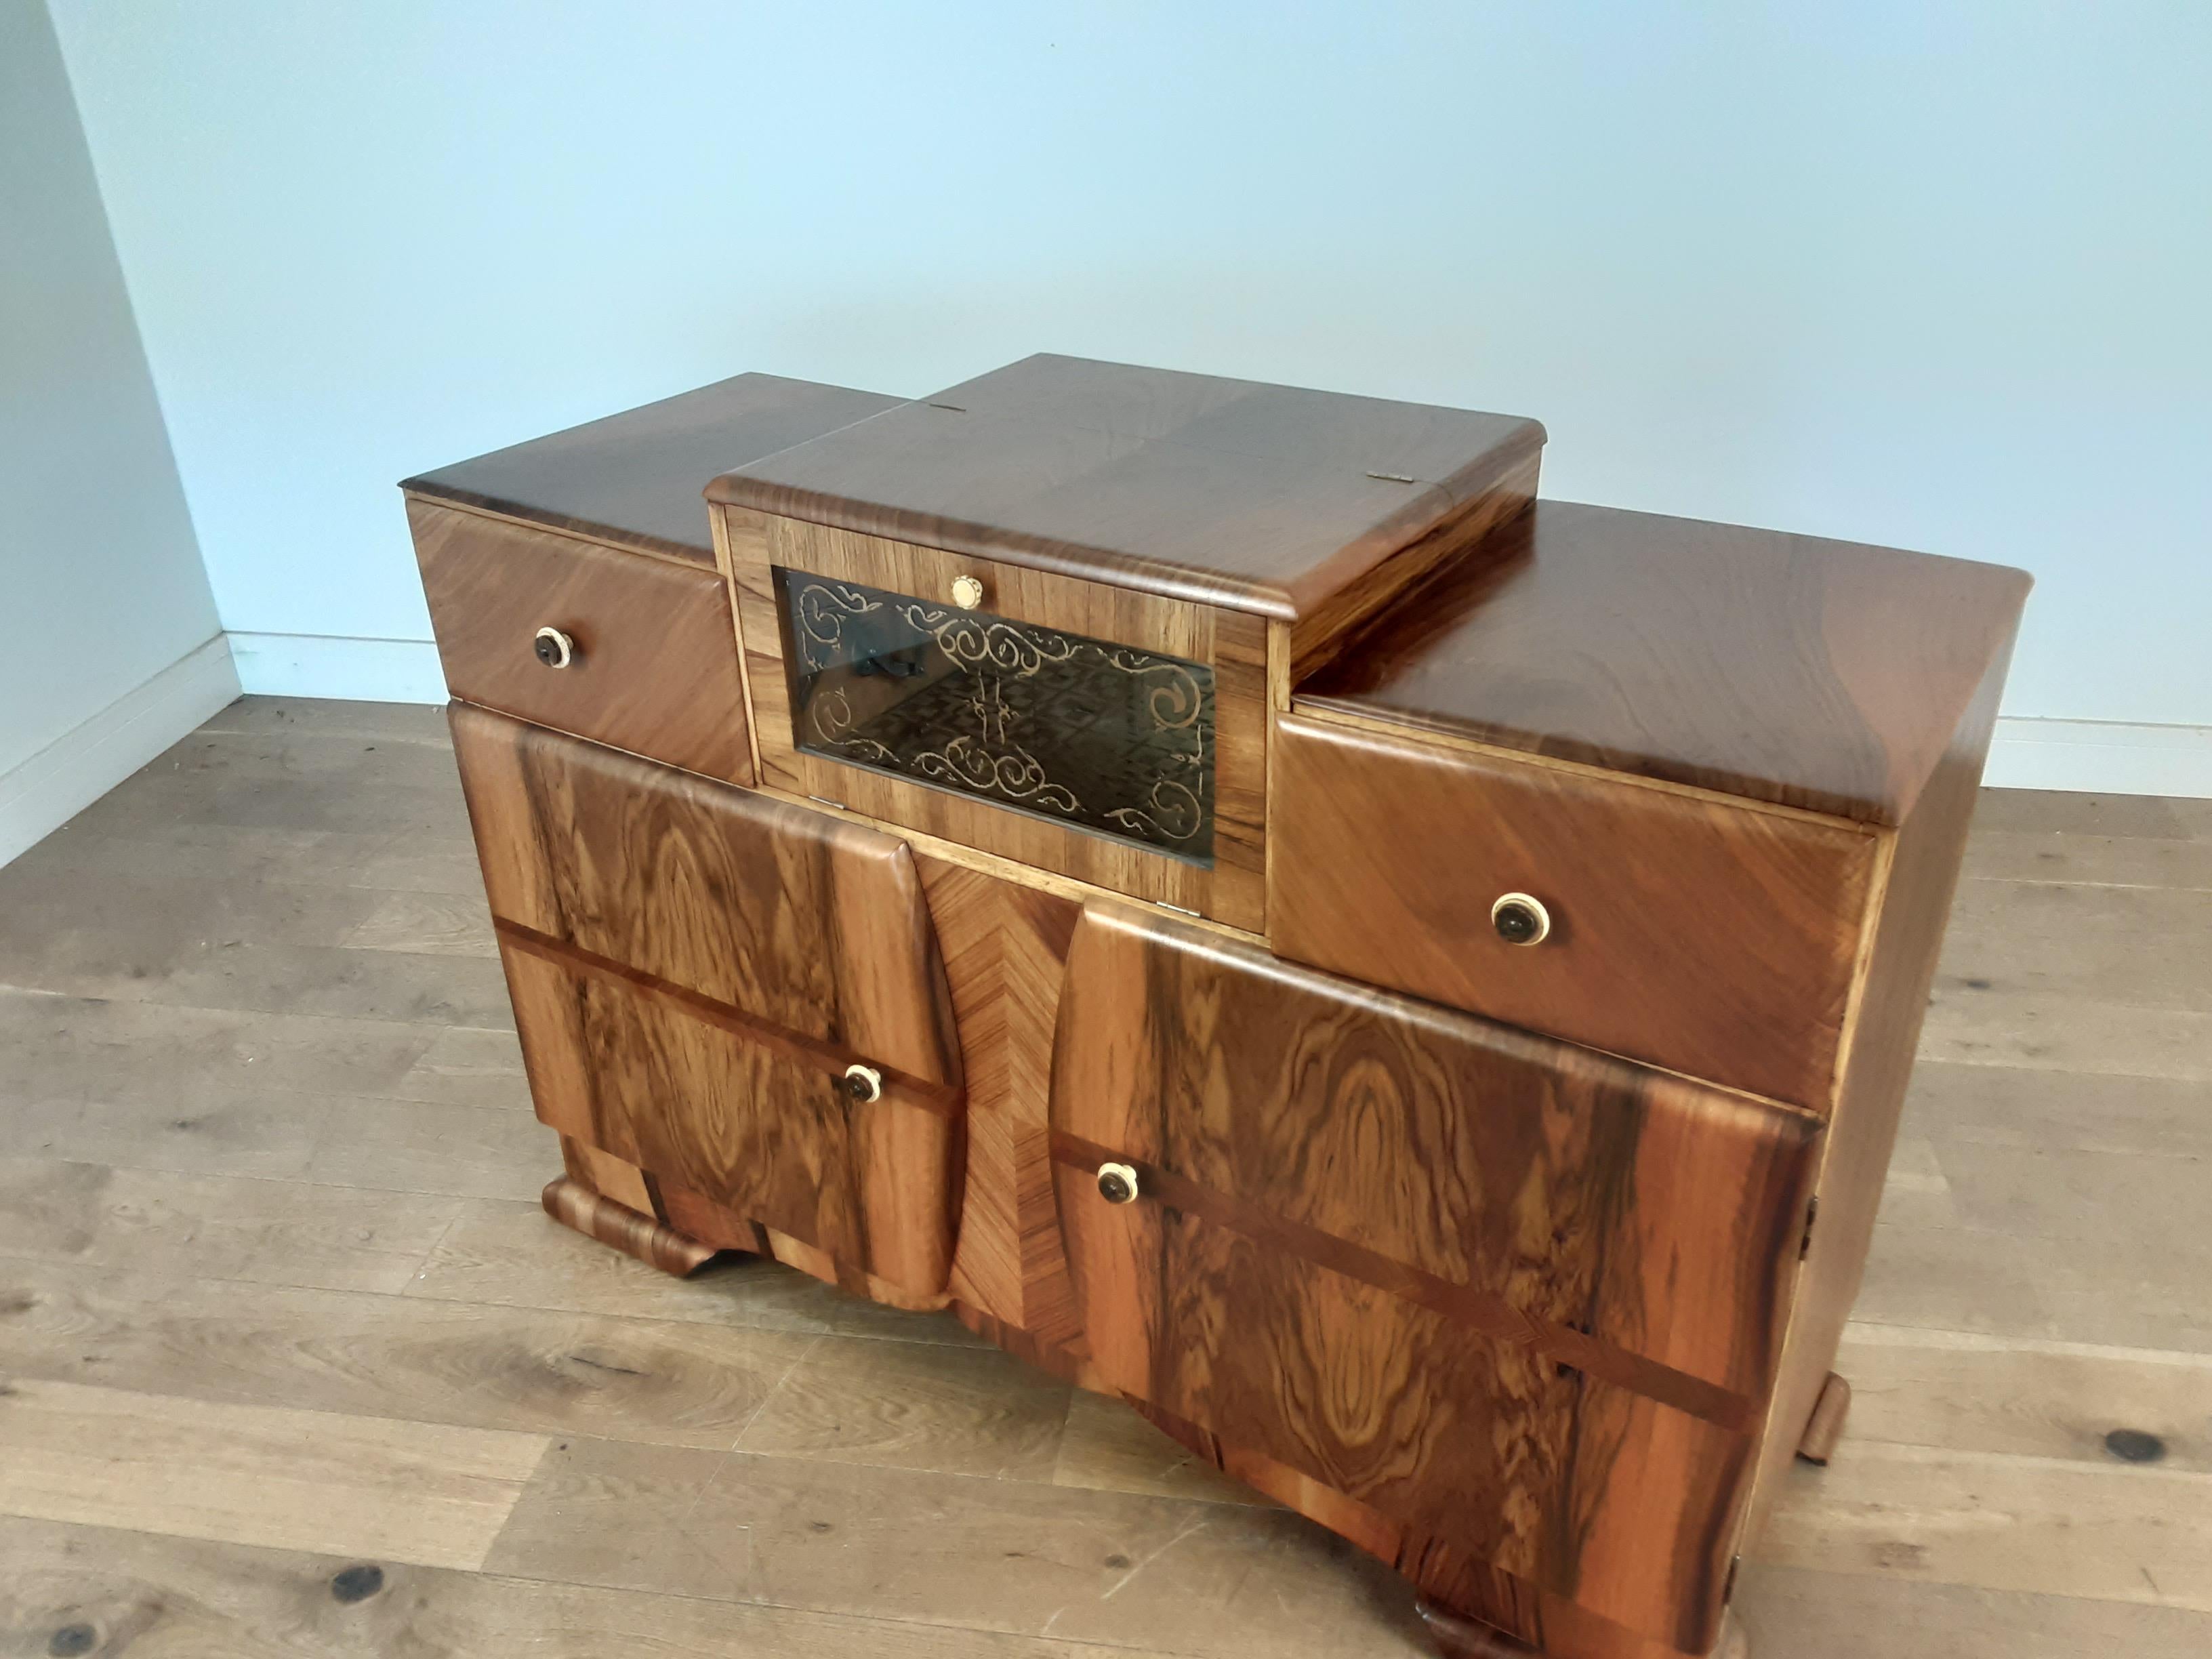 Art Deco cocktail bar.
An Art Deco cocktail sideboard with glazed fall front cocktail compartment between two drawers, the lower section with through shelving.
finished in a stunning figured walnut.
Measures: 94 cm H in the centre, 88 cm h at the